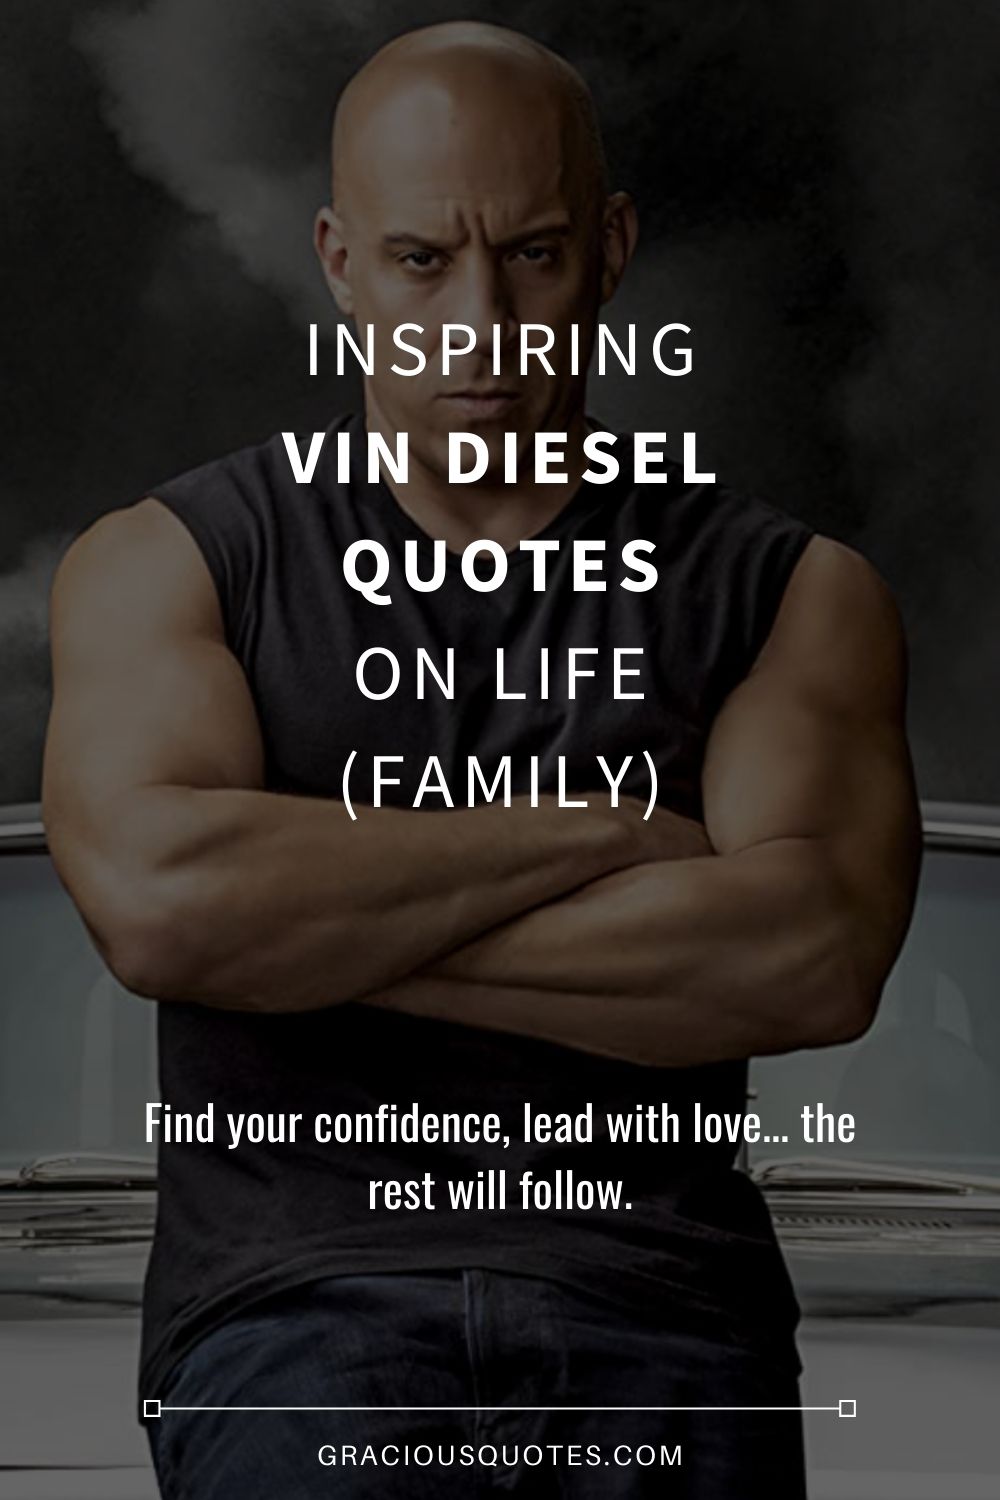 Inspiring Vin Diesel Quotes on Life (FAMILY) - Gracious Quotes